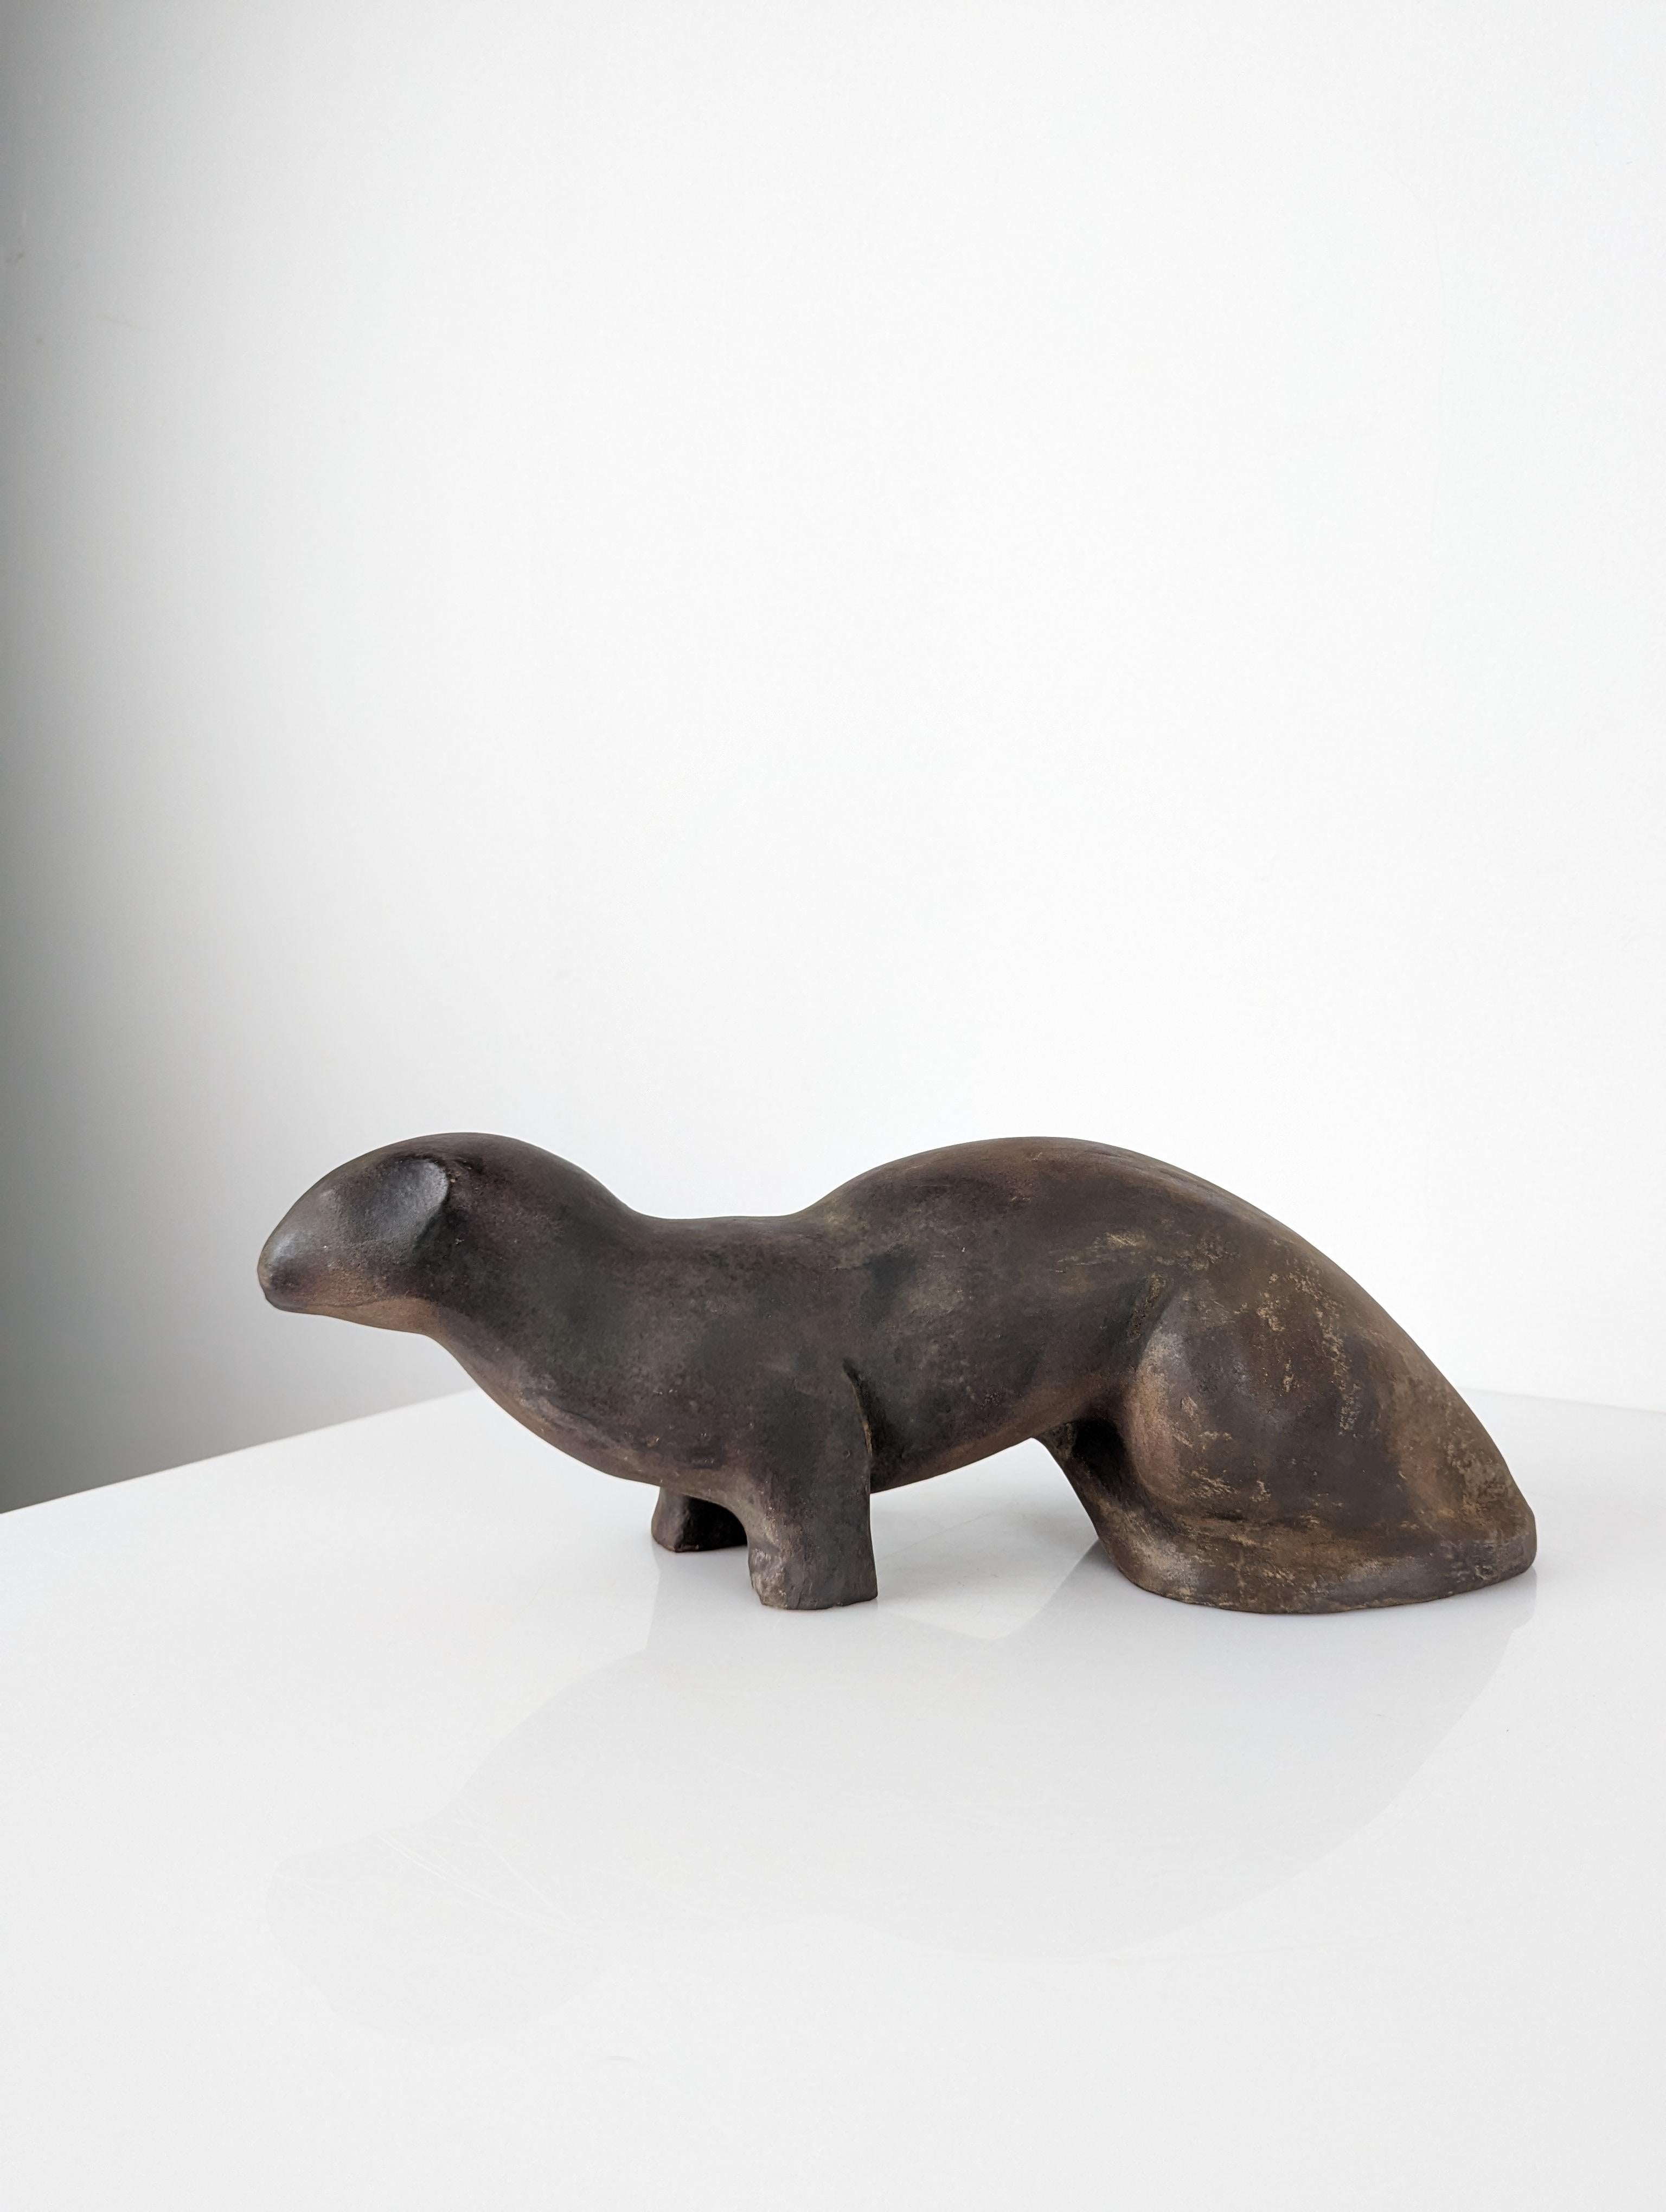 Wonderful ceramic sculpture by the great Spanish artist Elena Laverón, signed on the base. Representing an otter, this piece conveys great peace and creates a relaxing atmosphere around it. Thanks to his particular way of representing the volumes